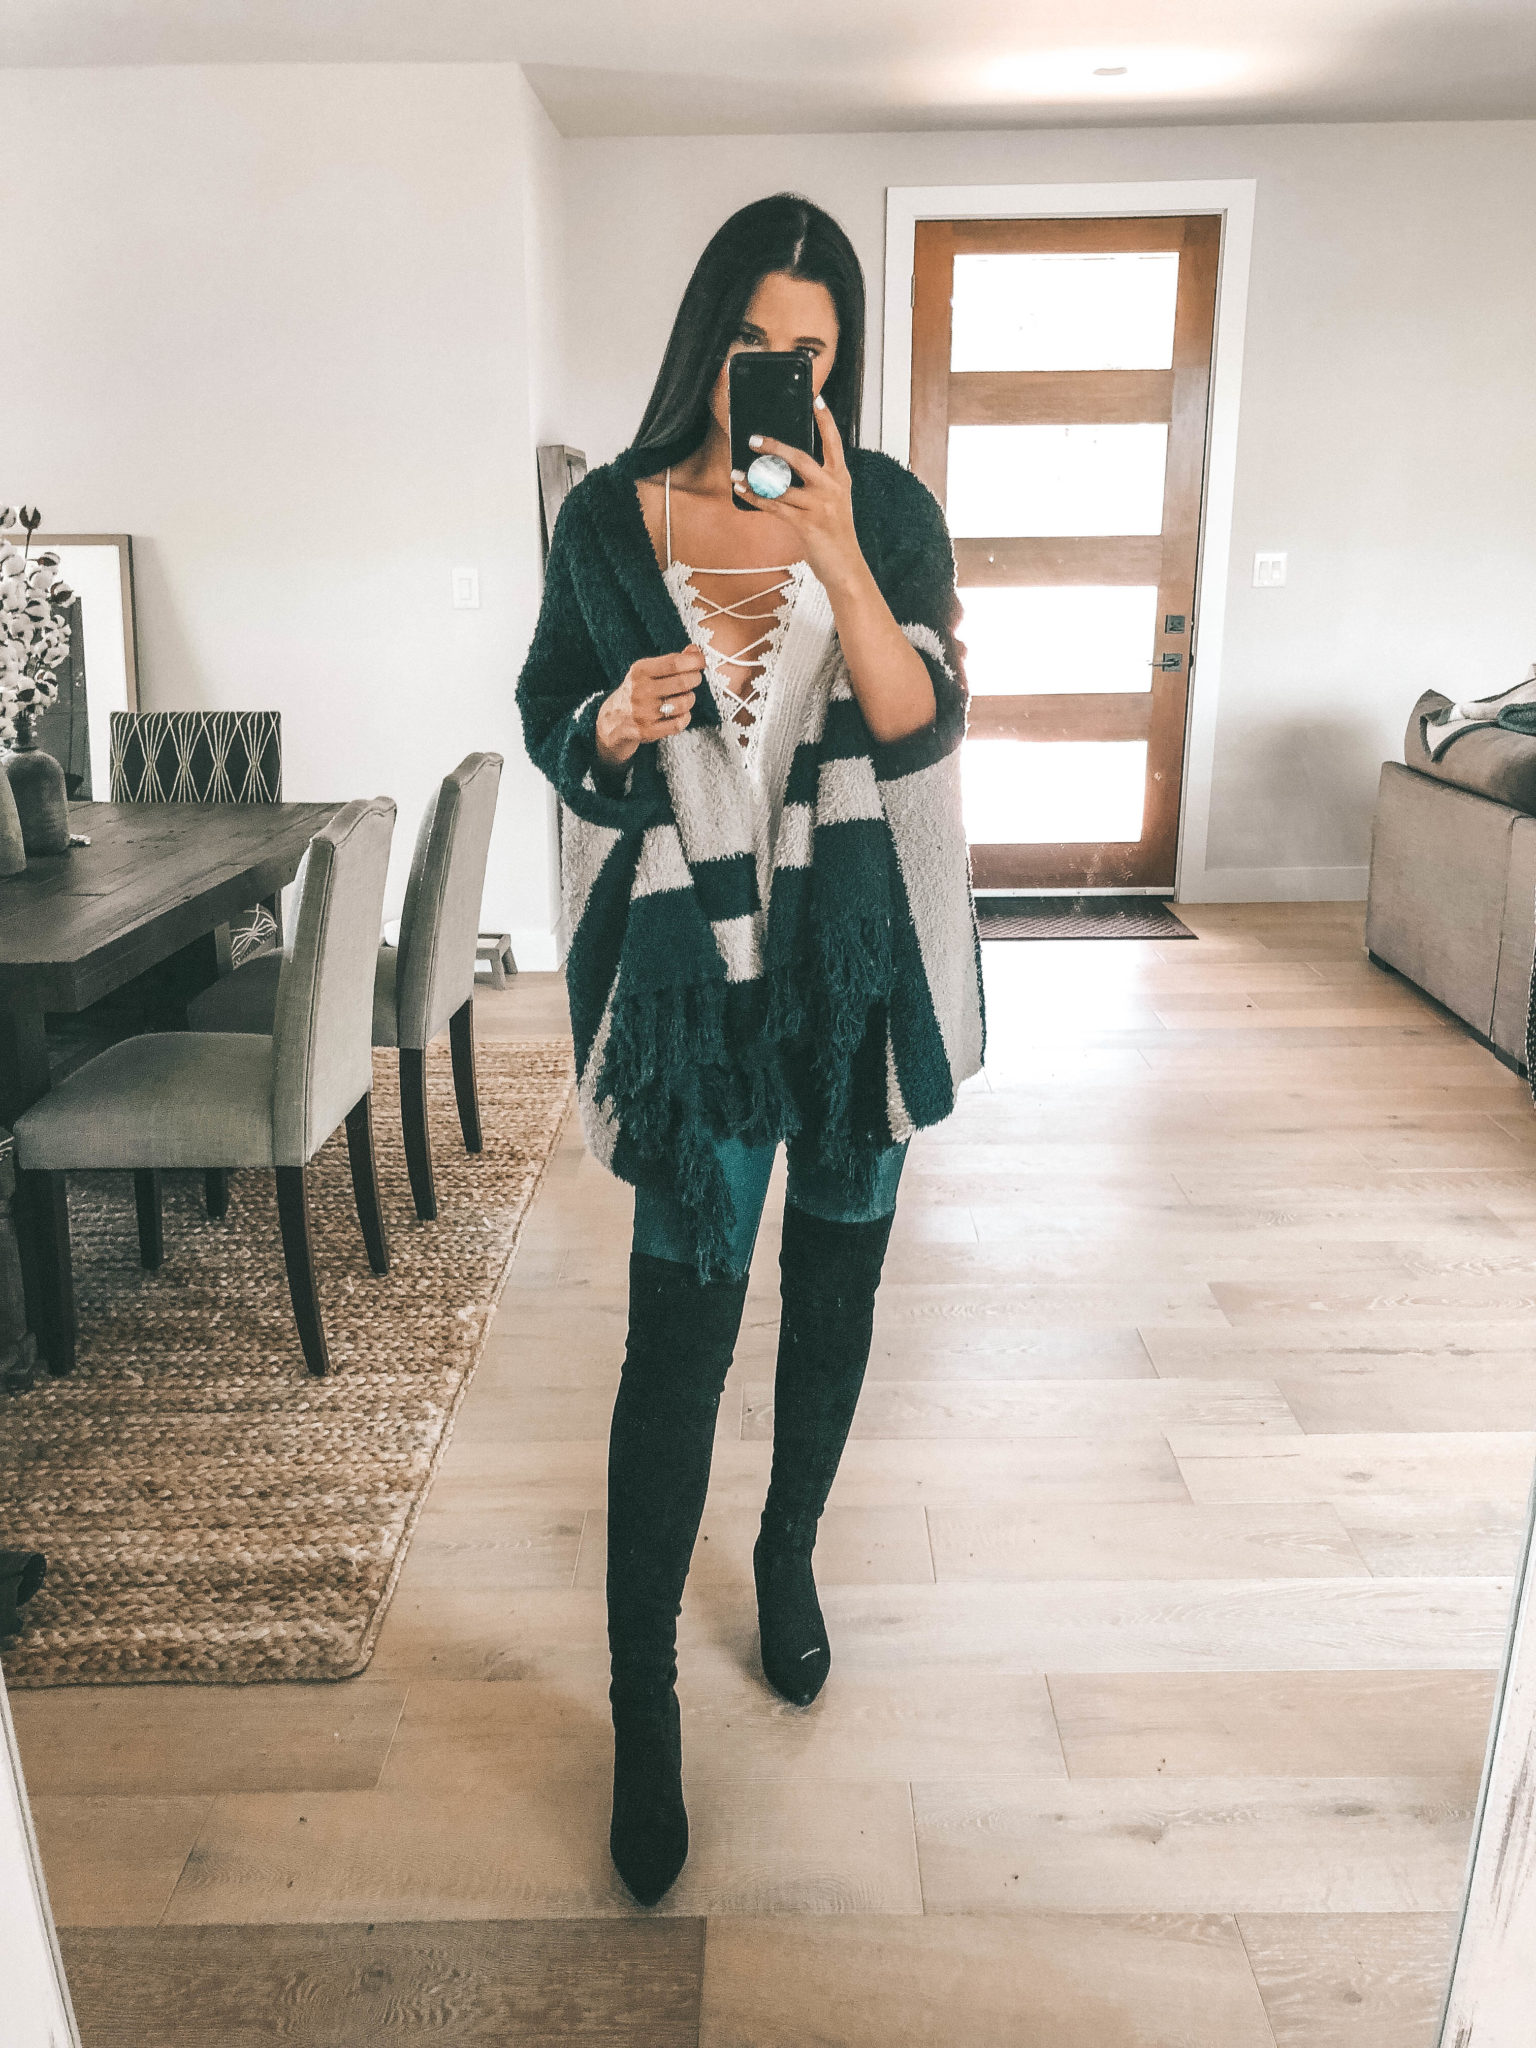 #nsale #cardigans #sweaters #nordstrom #nordstromsale #fallstyle #winterstyle #dtkaustin - Nordstrom Anniversary Sale Sweaters + Cardigans Try-On Session featured by popular Austin fashion blogger Dressed to Kill